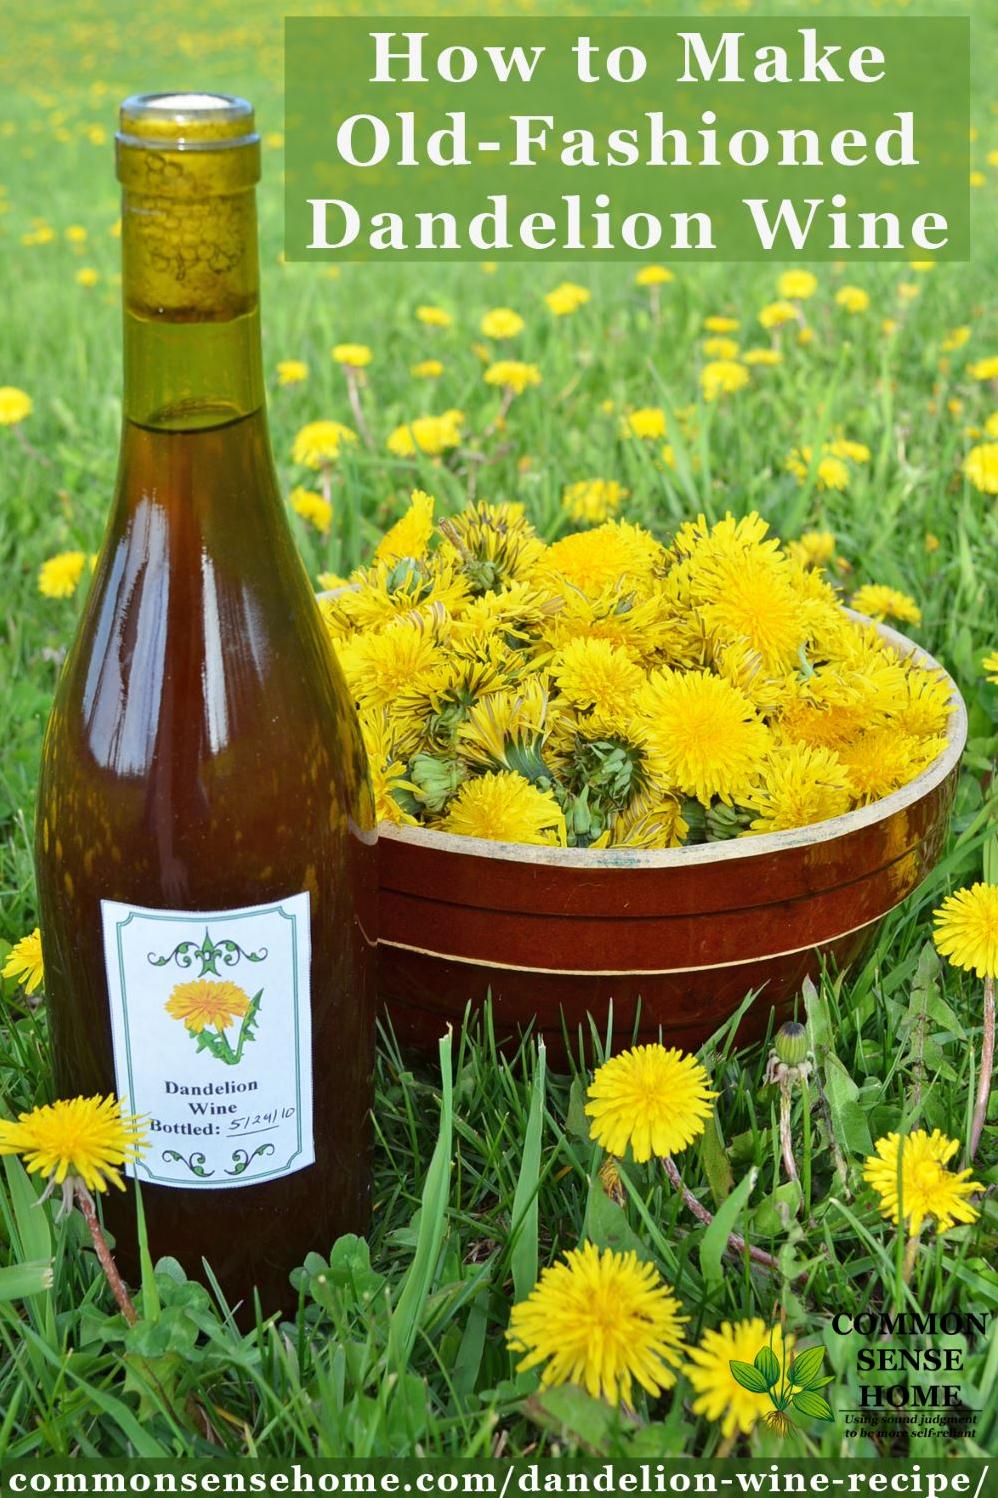 Delicious Dandelion Flower Wine Recipe – Step-by-Step Guide